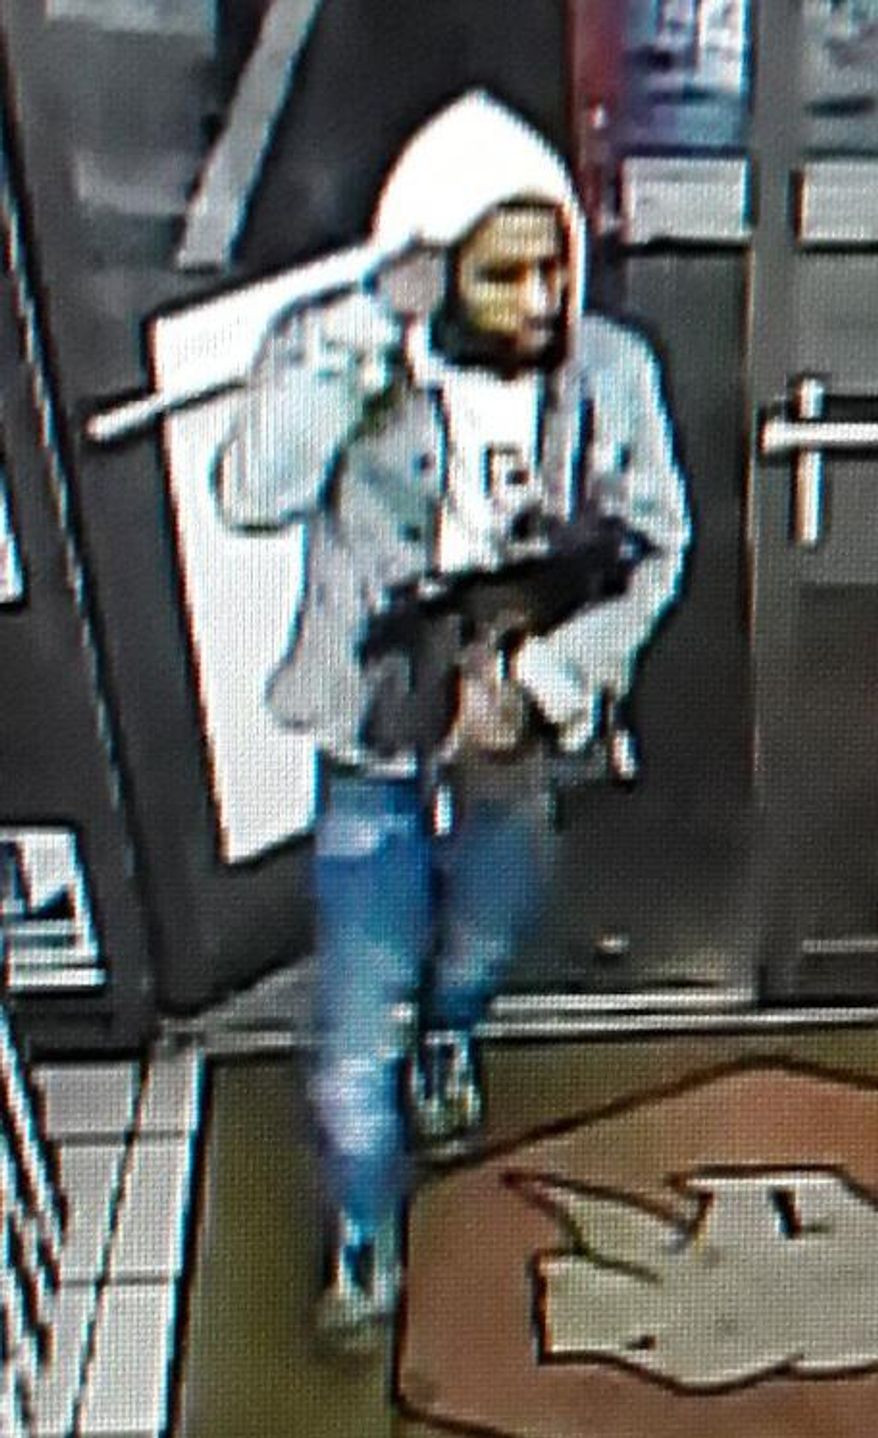 This image provided by the Lafourche Parish Sheriff Office shows a suspect entering a convenience store in Galliano, La. Louisiana authorities are trying to identify a man who left apparent designer bags holding drugs, a gun, cash and a digital scale in a convenience store. The man went into the store early Thursday, Jan. 2, 2020 and put the apparent Louis Vuitton and Gucci bags on a chair, according to a news release. (Lafourche Parish Sheriff Office via AP)